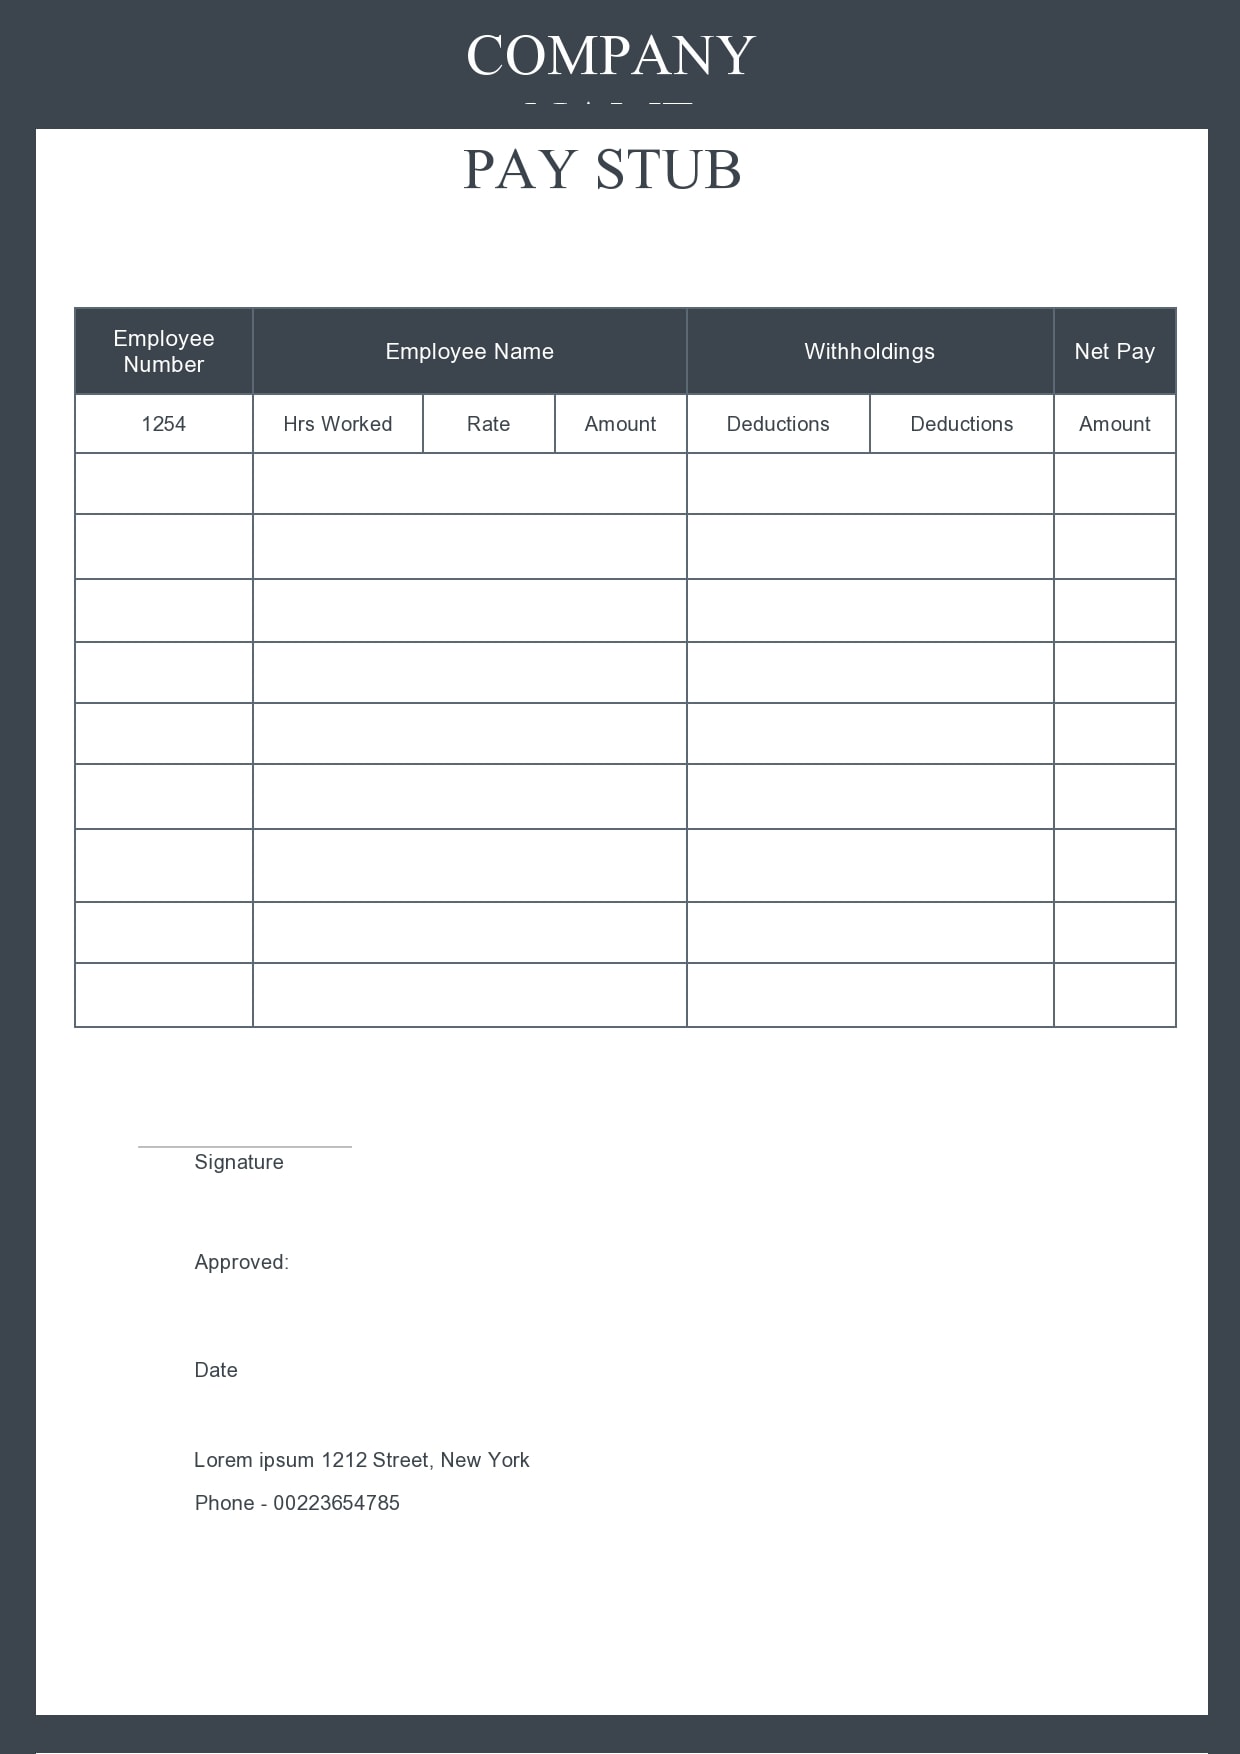 22 Free Pay Stub Templates [Excel, Word] - PrintableTemplates Pertaining To Pay Stub Template Word Document